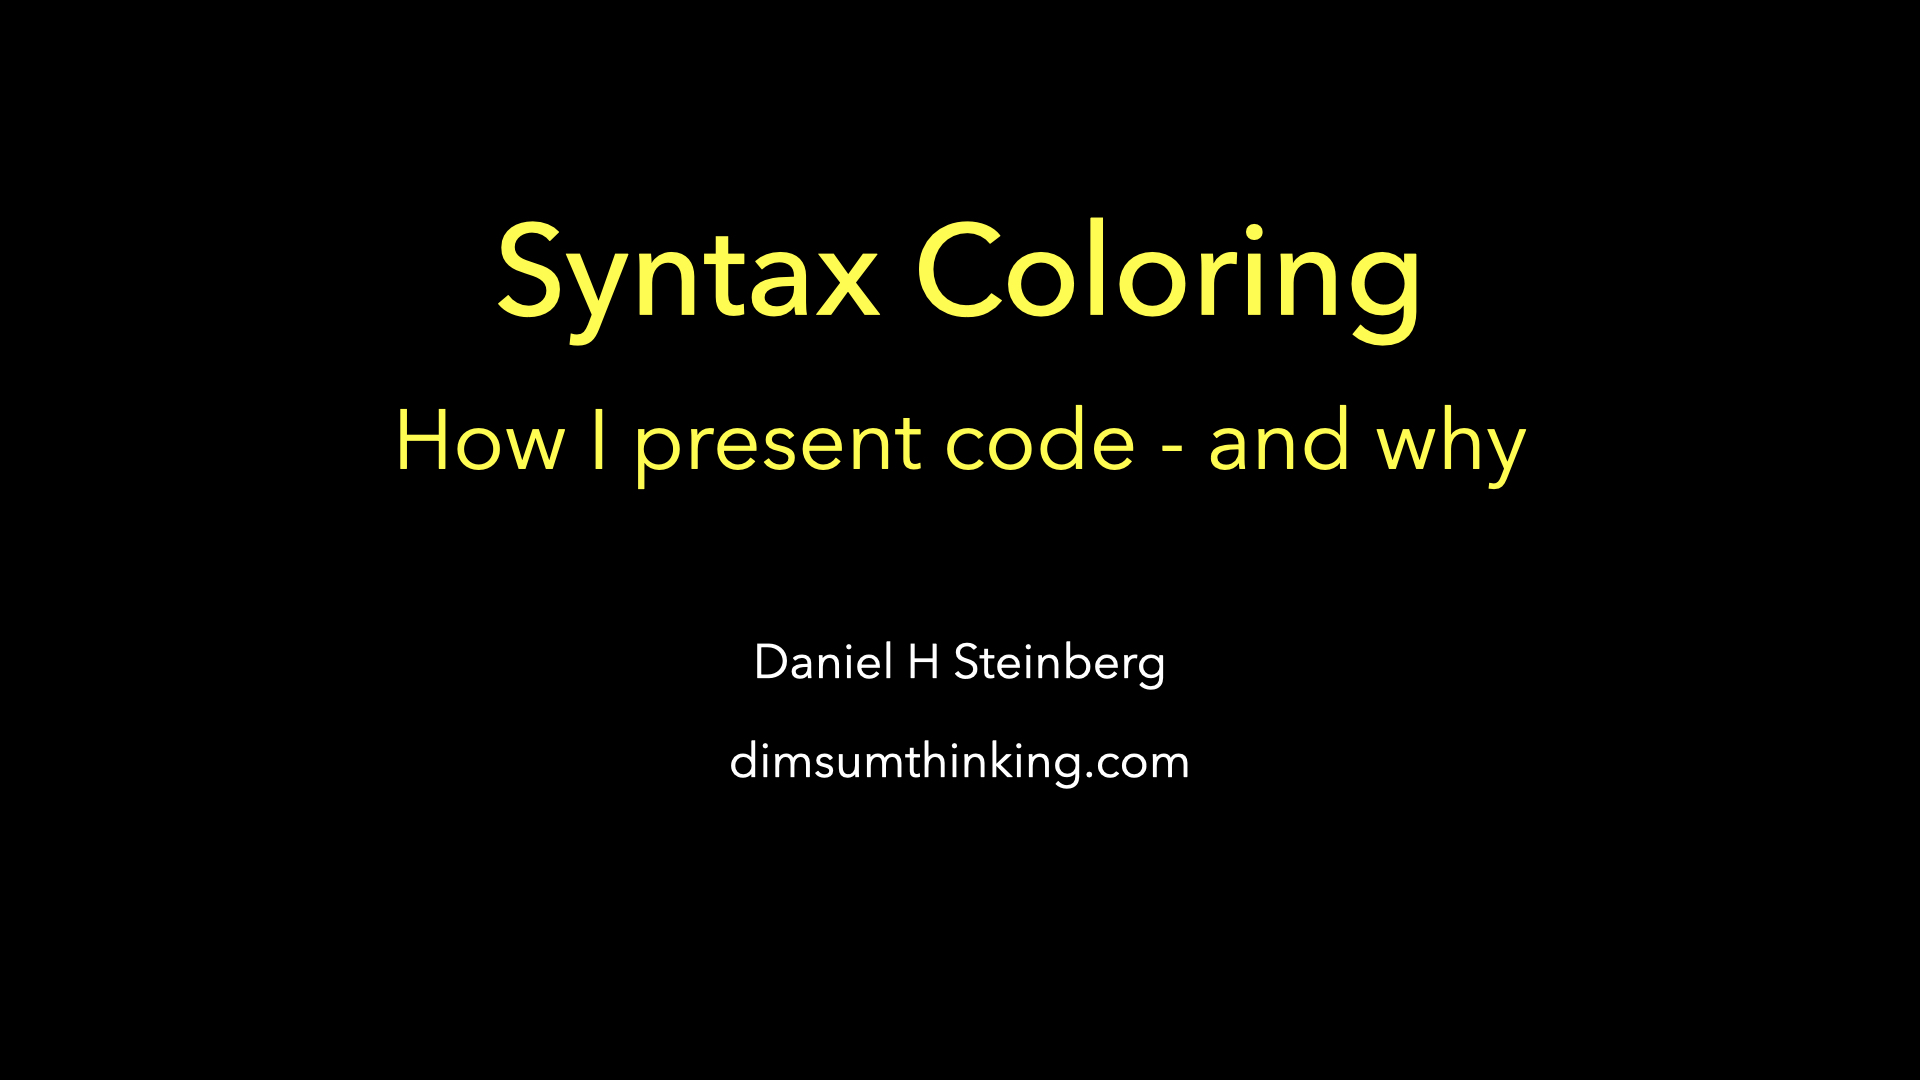 Link to Syntax Coloring